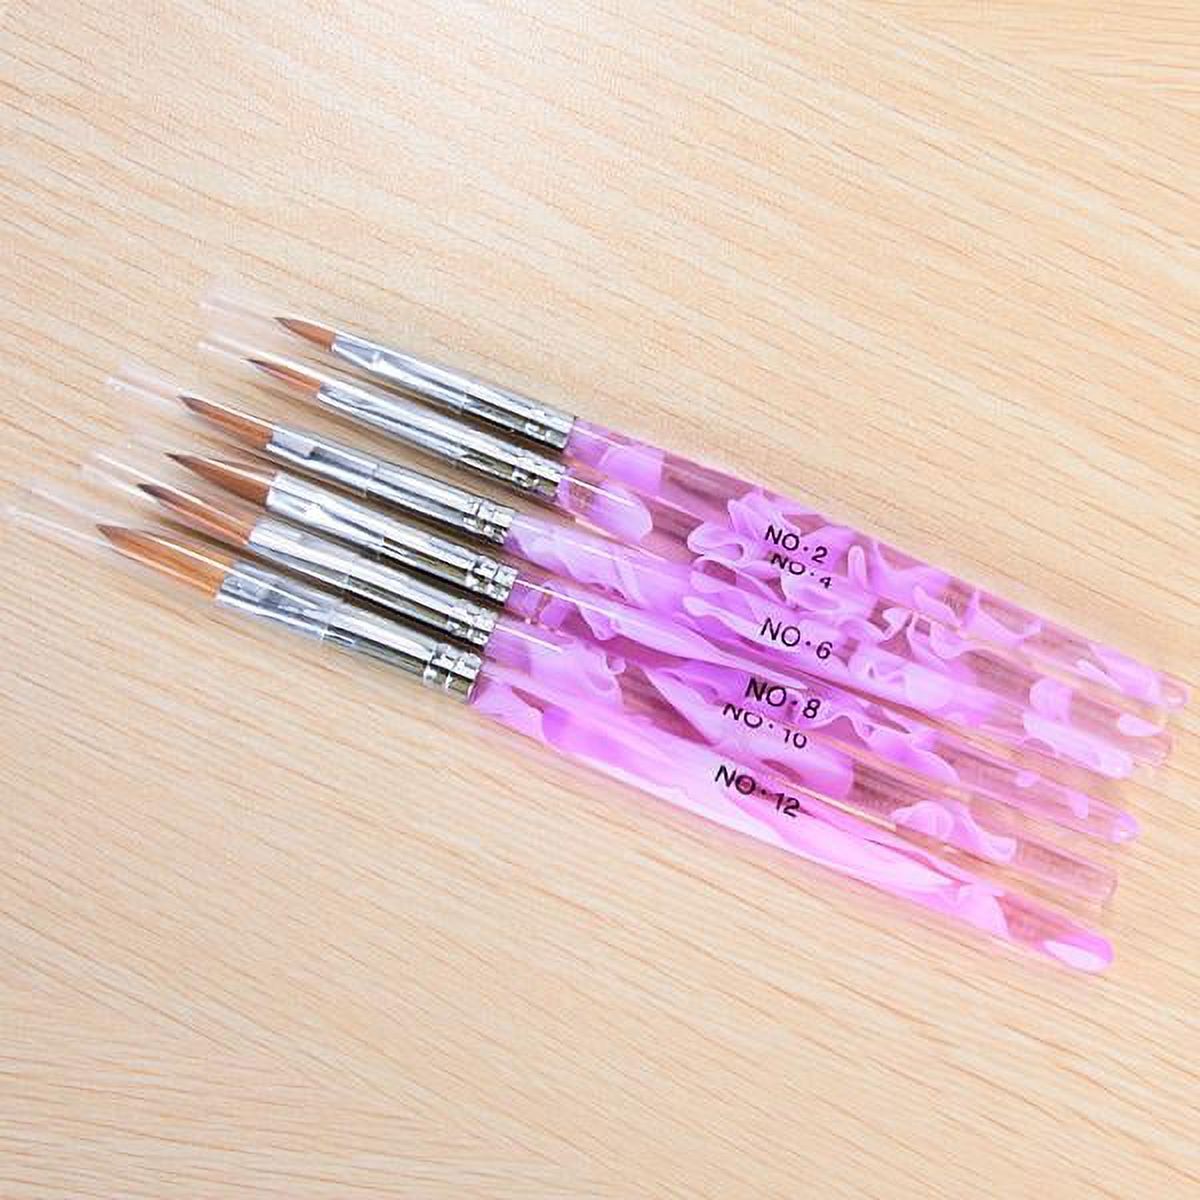 Set Of S Assorted Sizes Acrylic Nail Art Brush Manicure Equipment Beauty Supplies Cosmetic Tool Light Lavender - image 5 of 7